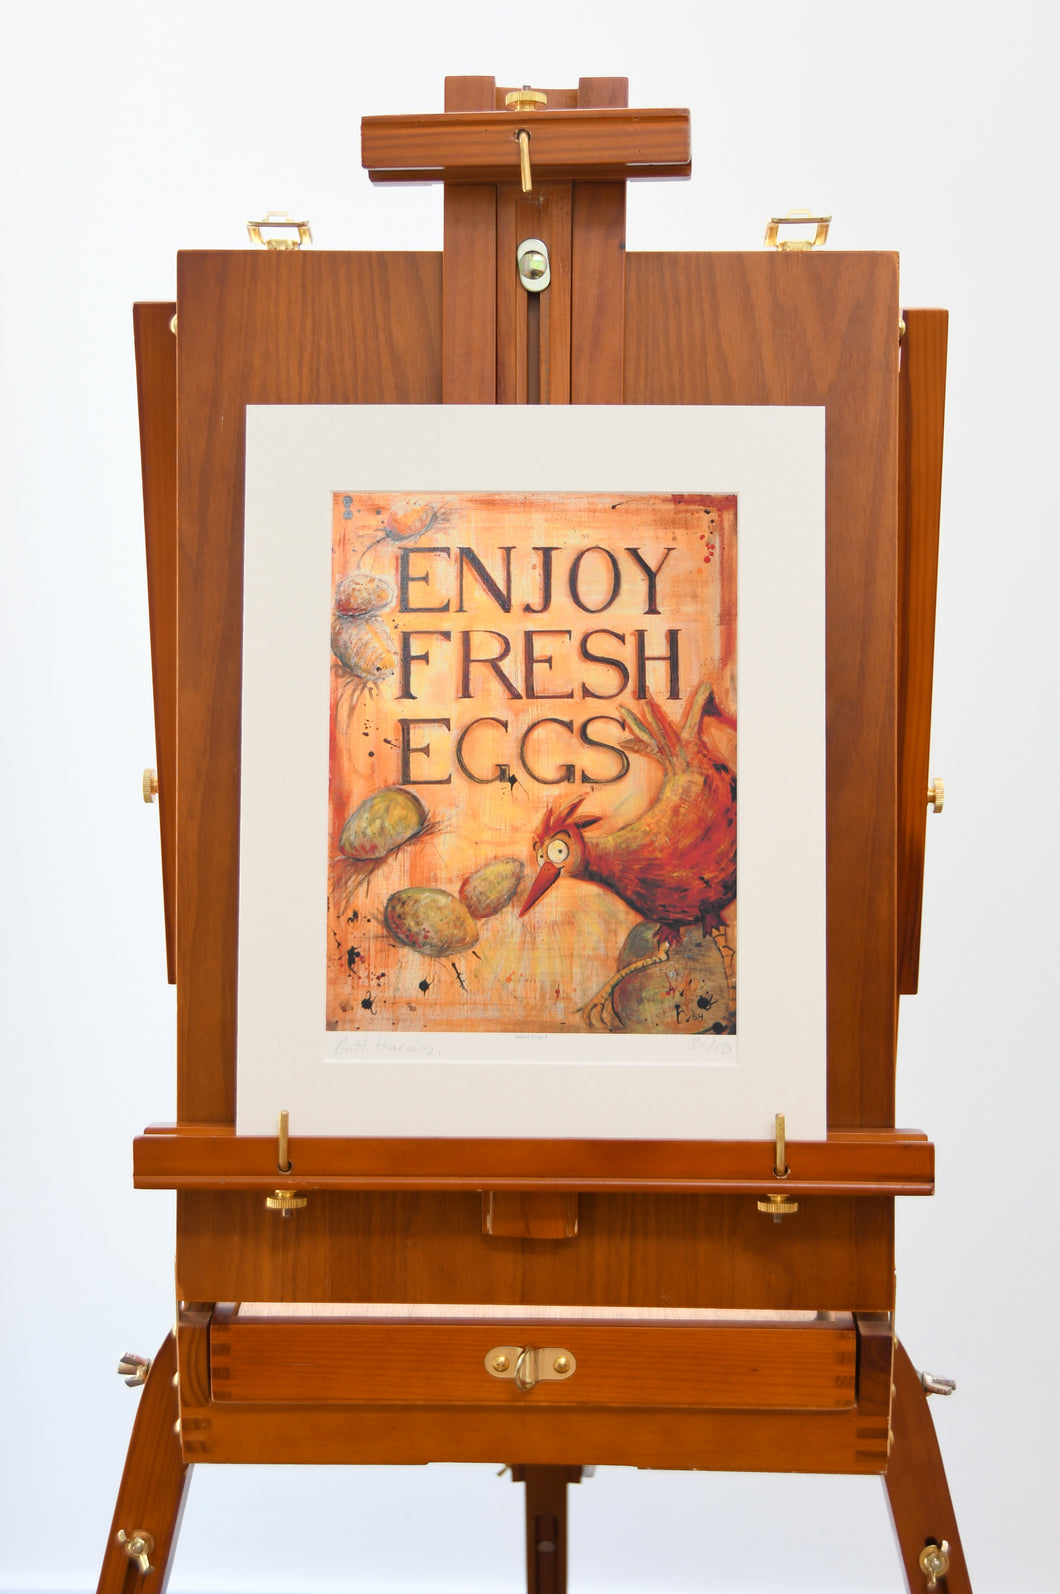 Enjoy Fresh Eggs is a Limited Edition Print, therefore each one is numbered and signed by Britt. Taken from an Original acrylic painting on canvas this A4 sized print is memorable and striking. Perfect for your home or a friends'.